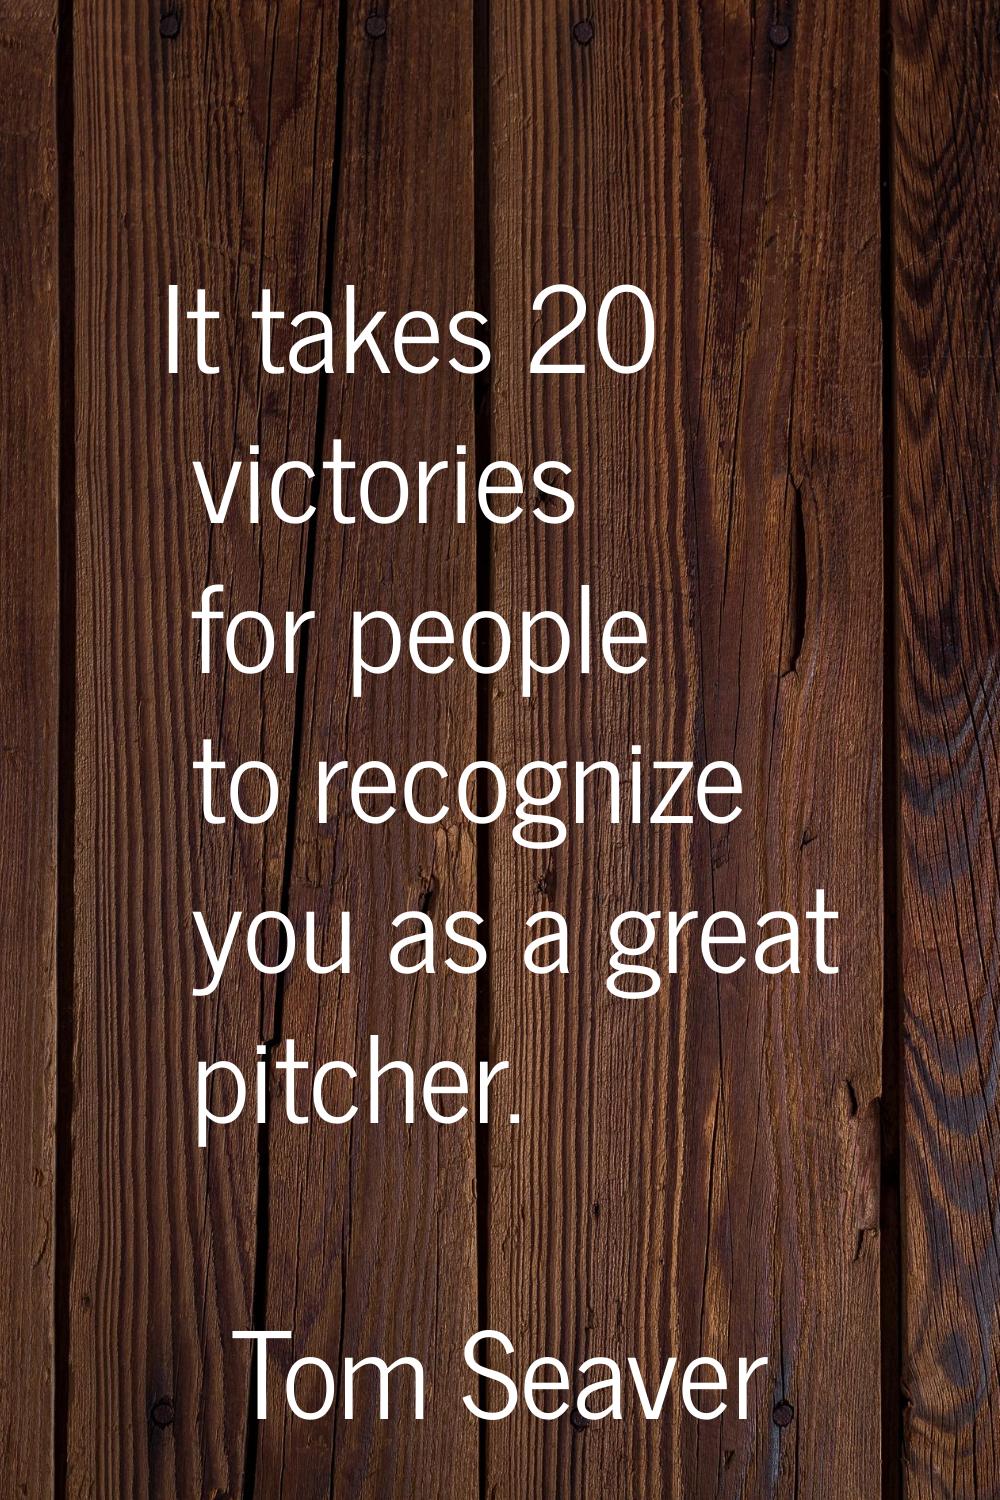 It takes 20 victories for people to recognize you as a great pitcher.